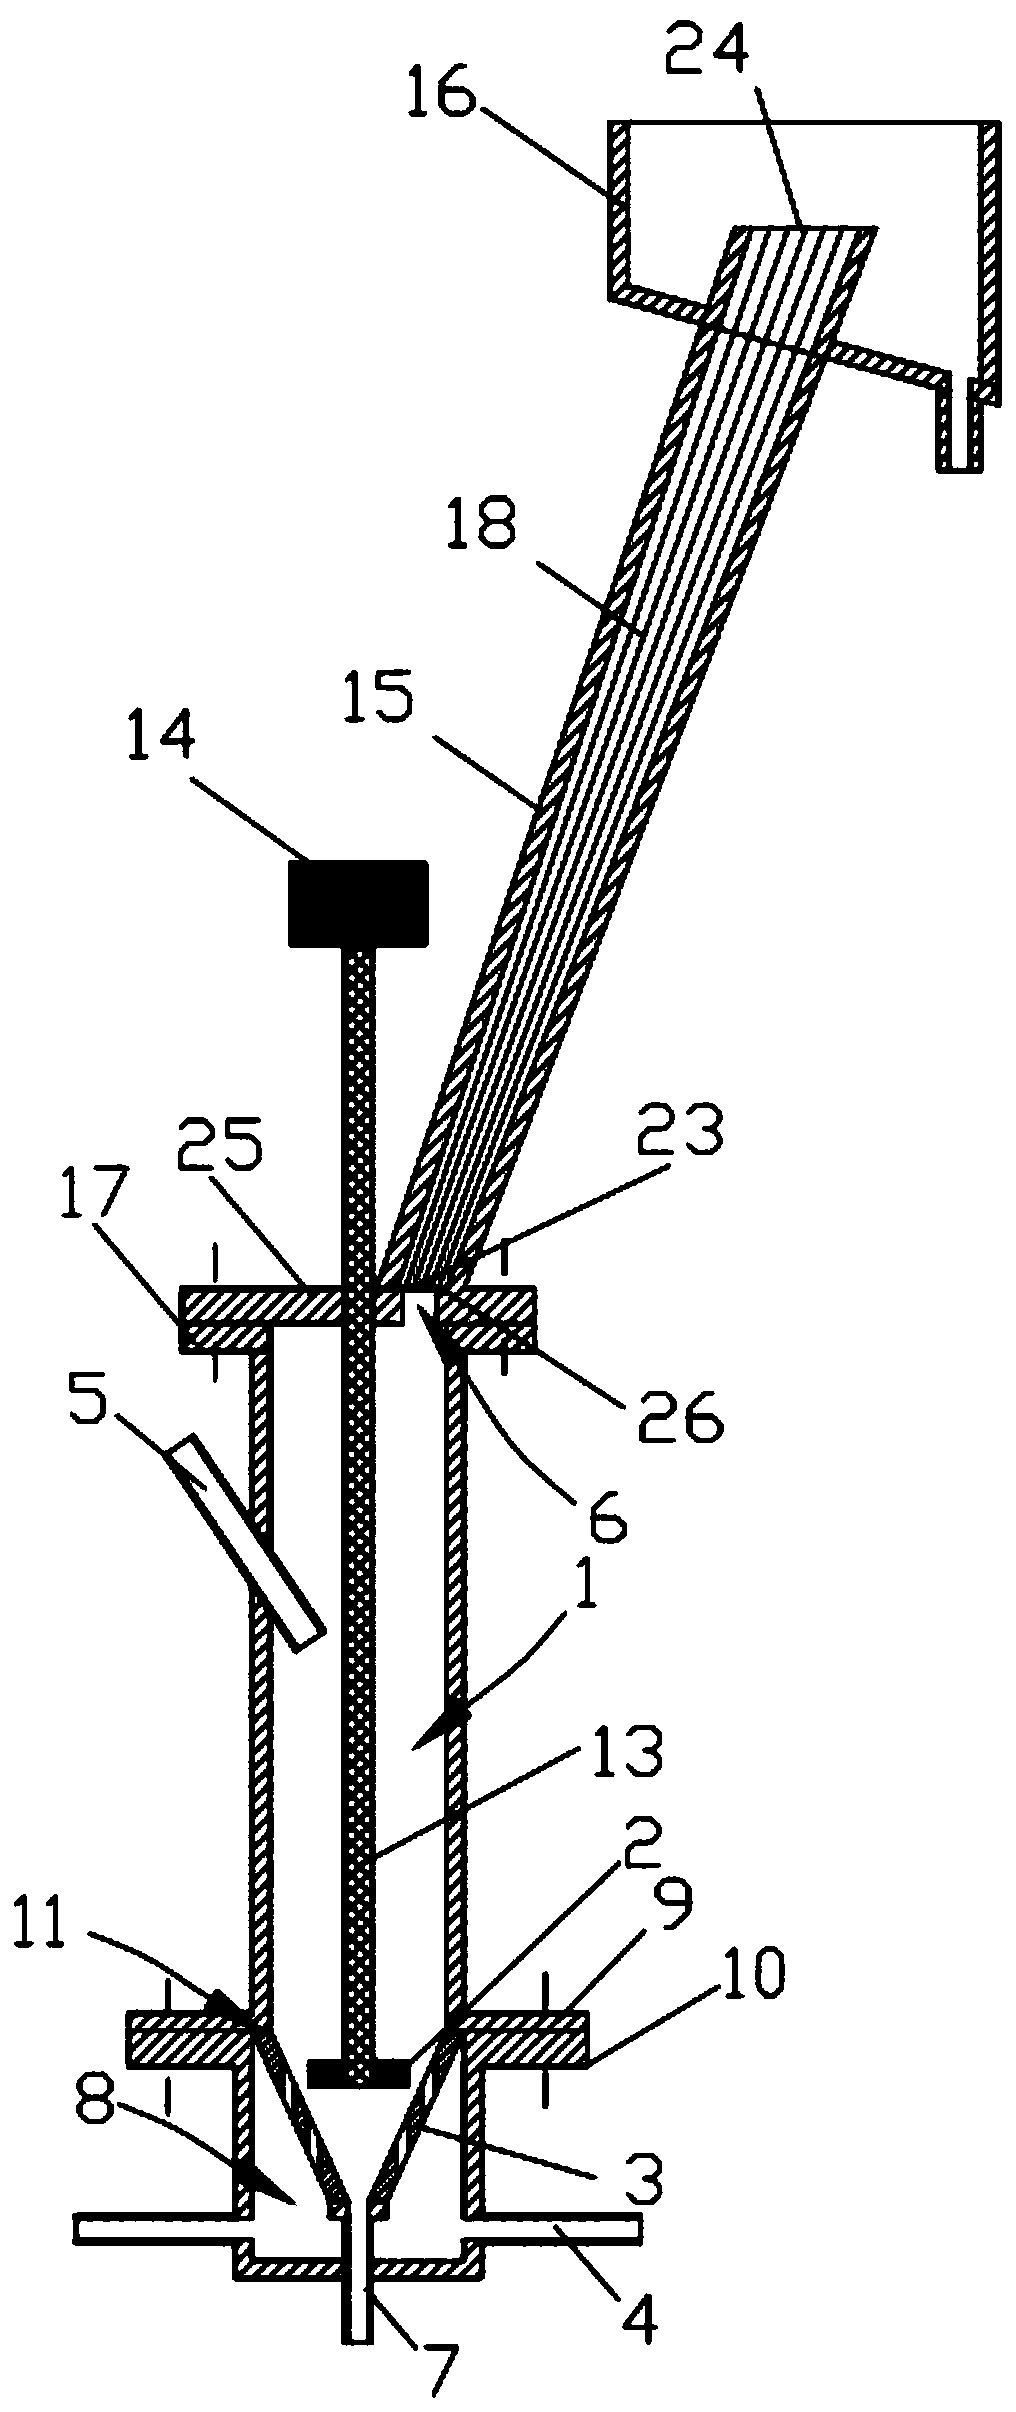 Special-shaped inclined plane countercurrent sorting device